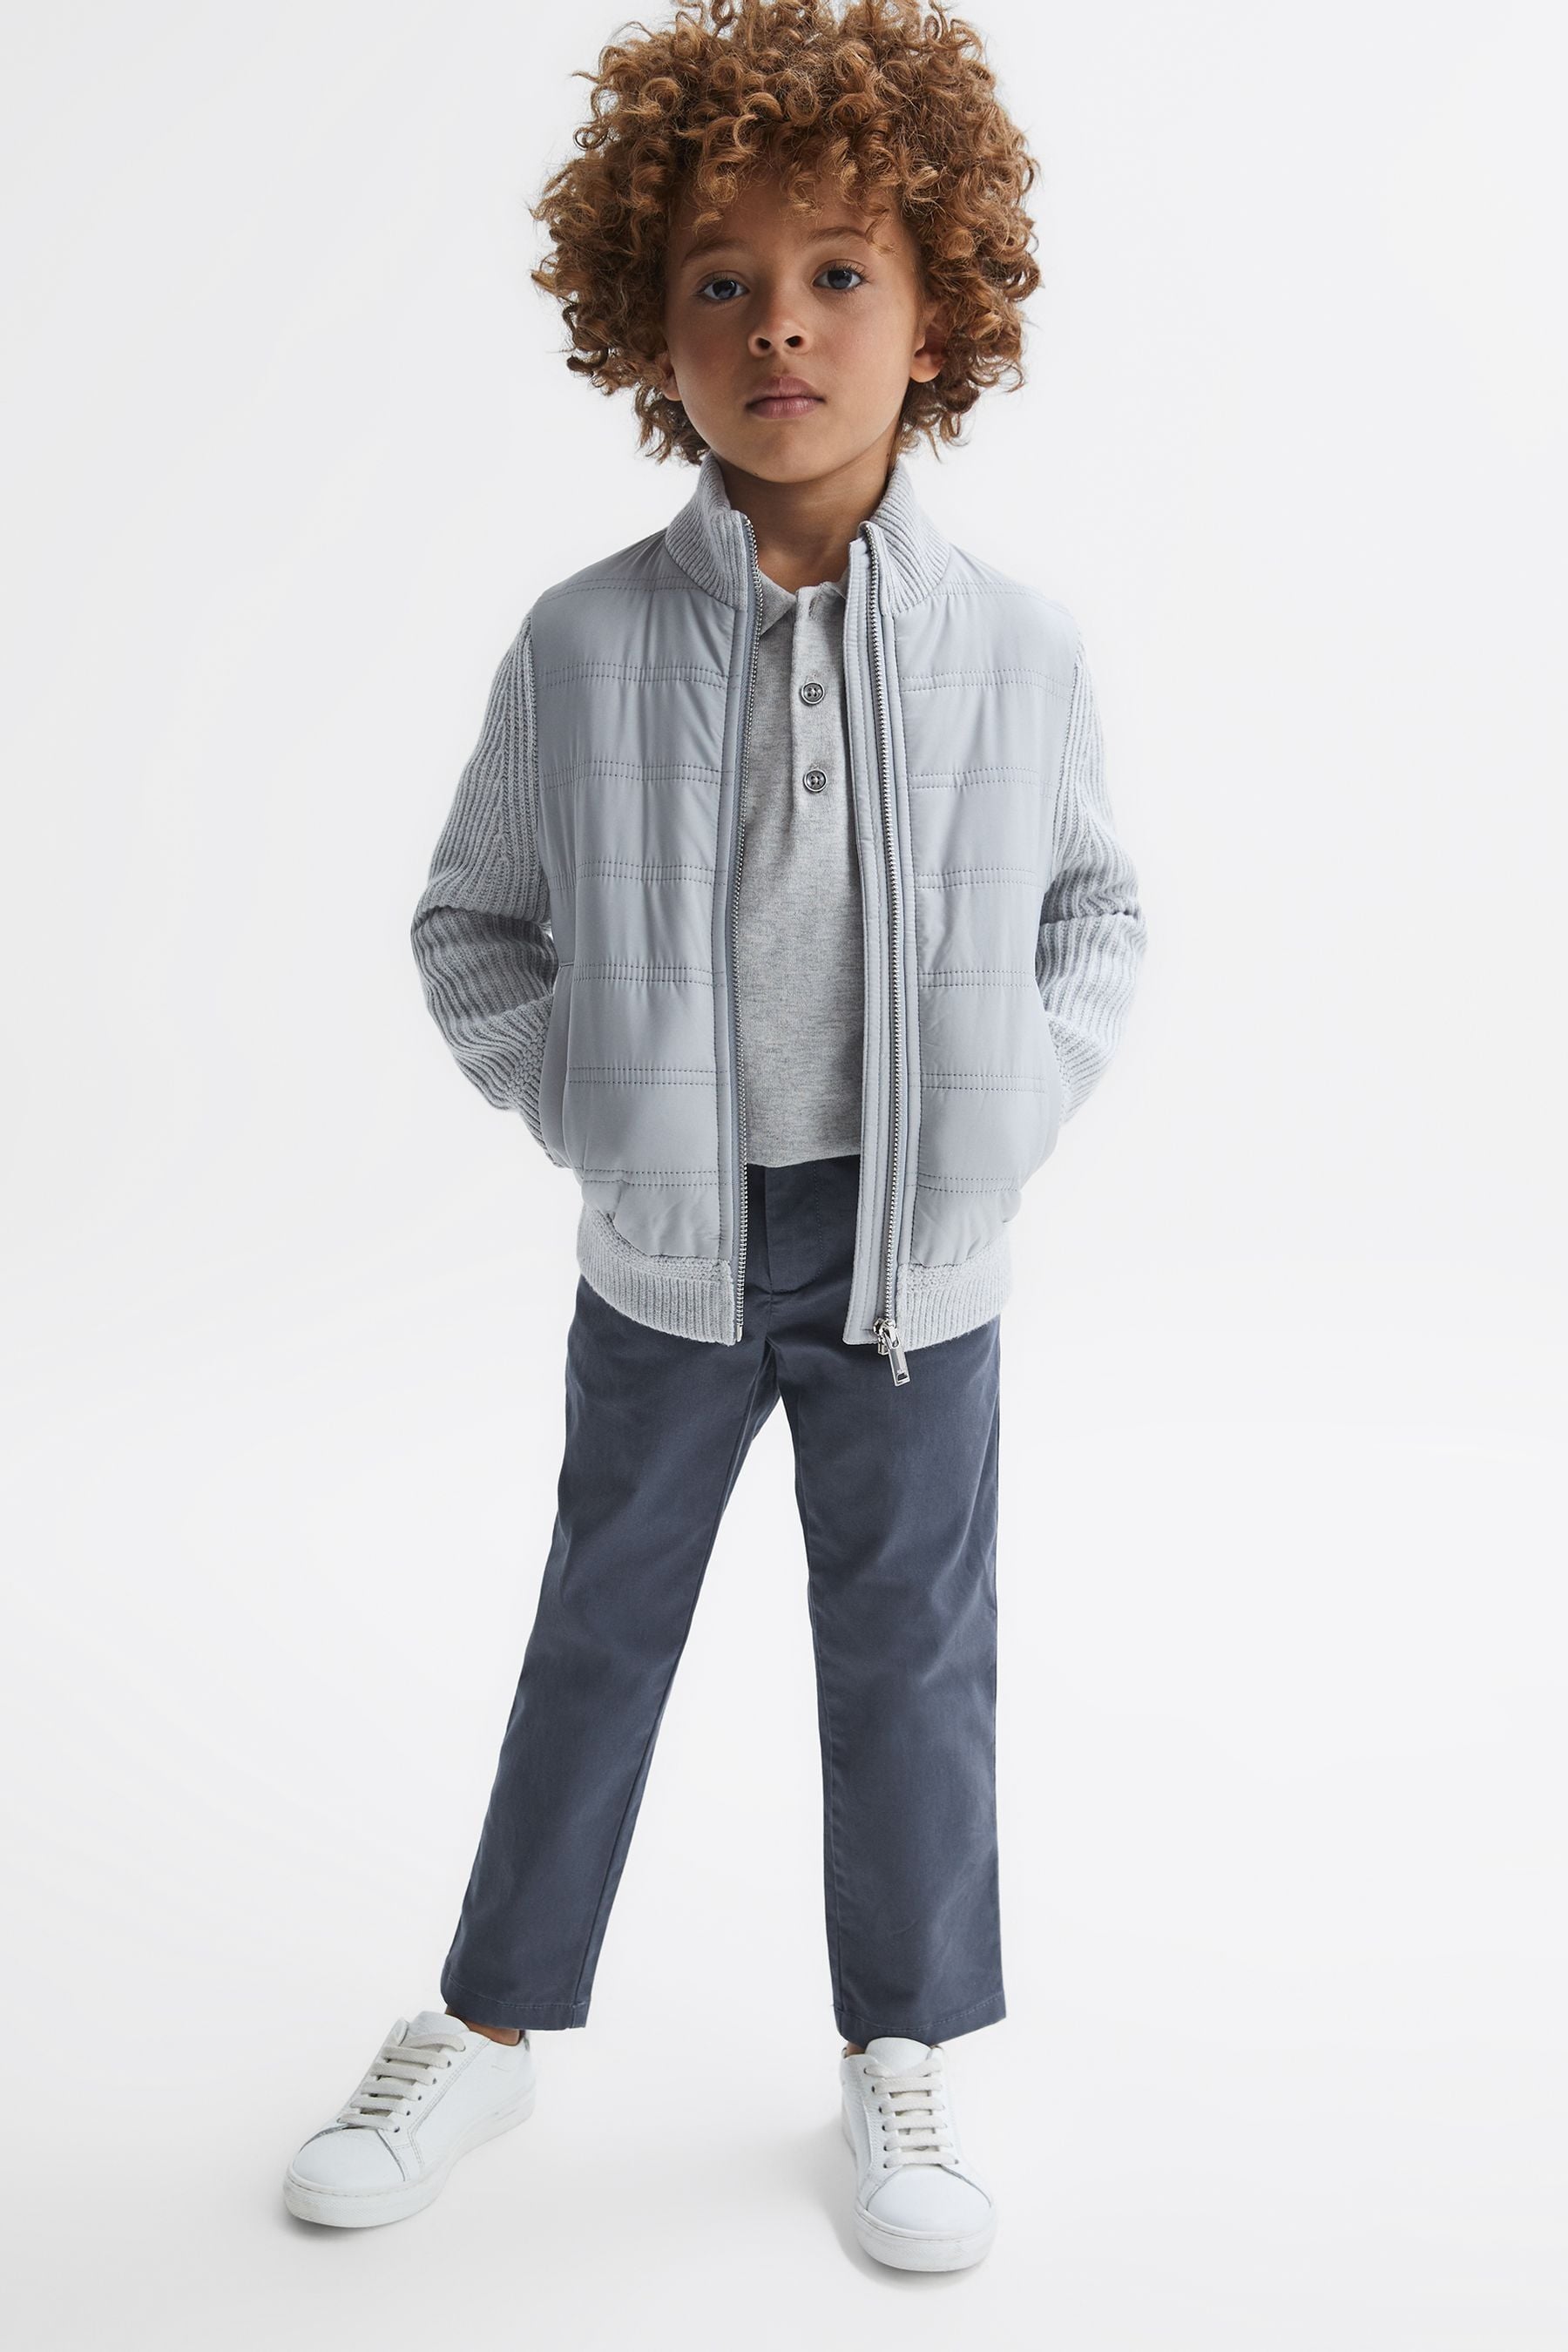 Reiss Kids' Pitch In Bright Airforce